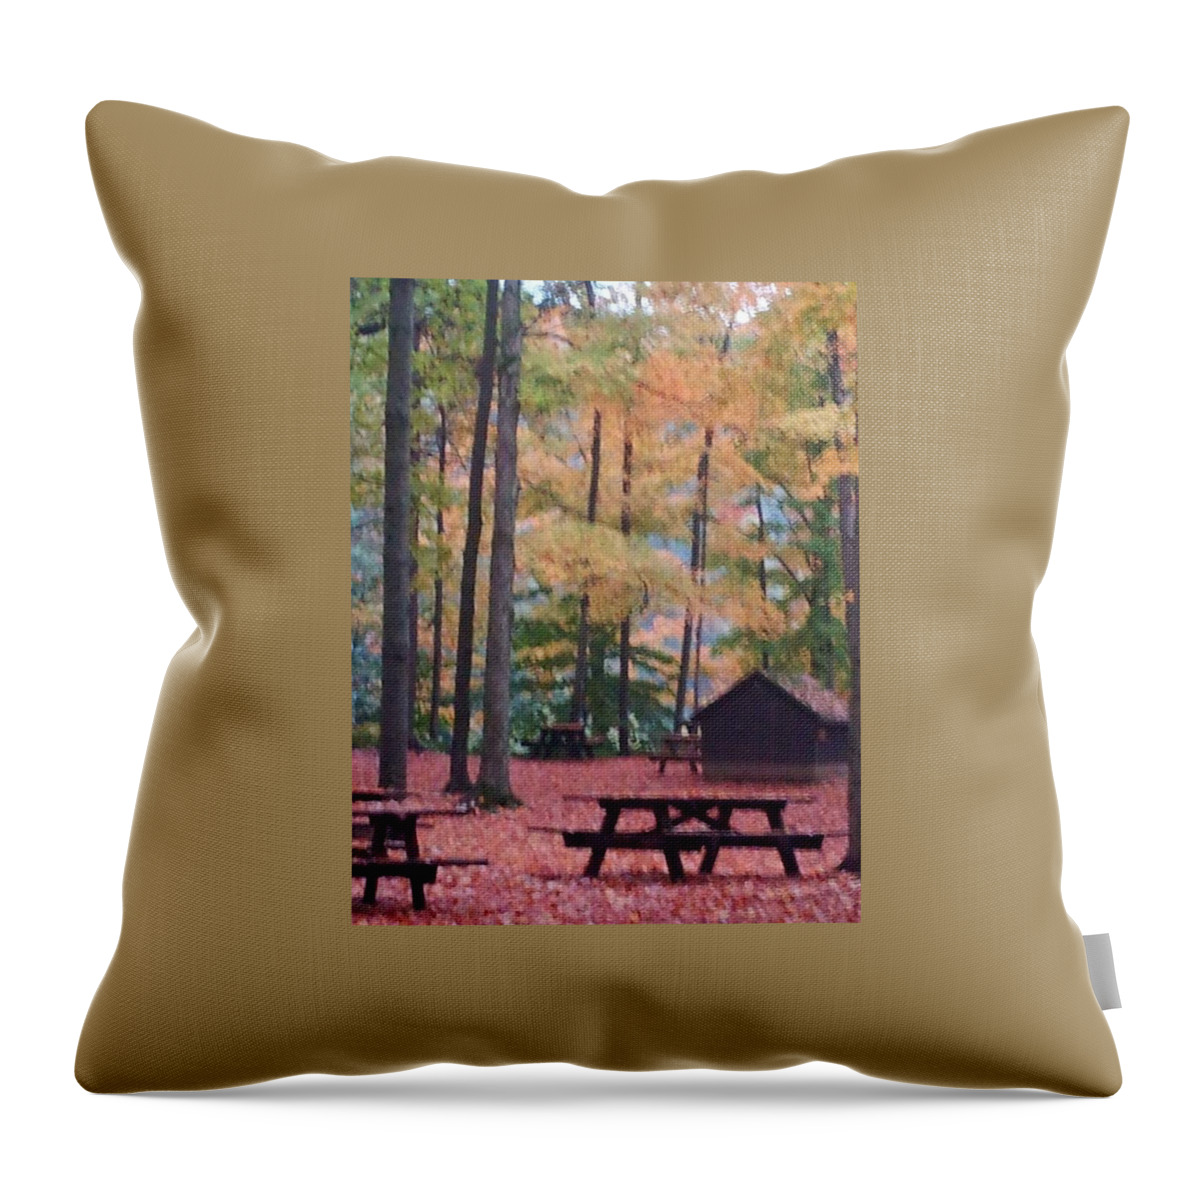 Rain Throw Pillow featuring the photograph Blurred Moments by Dani McEvoy